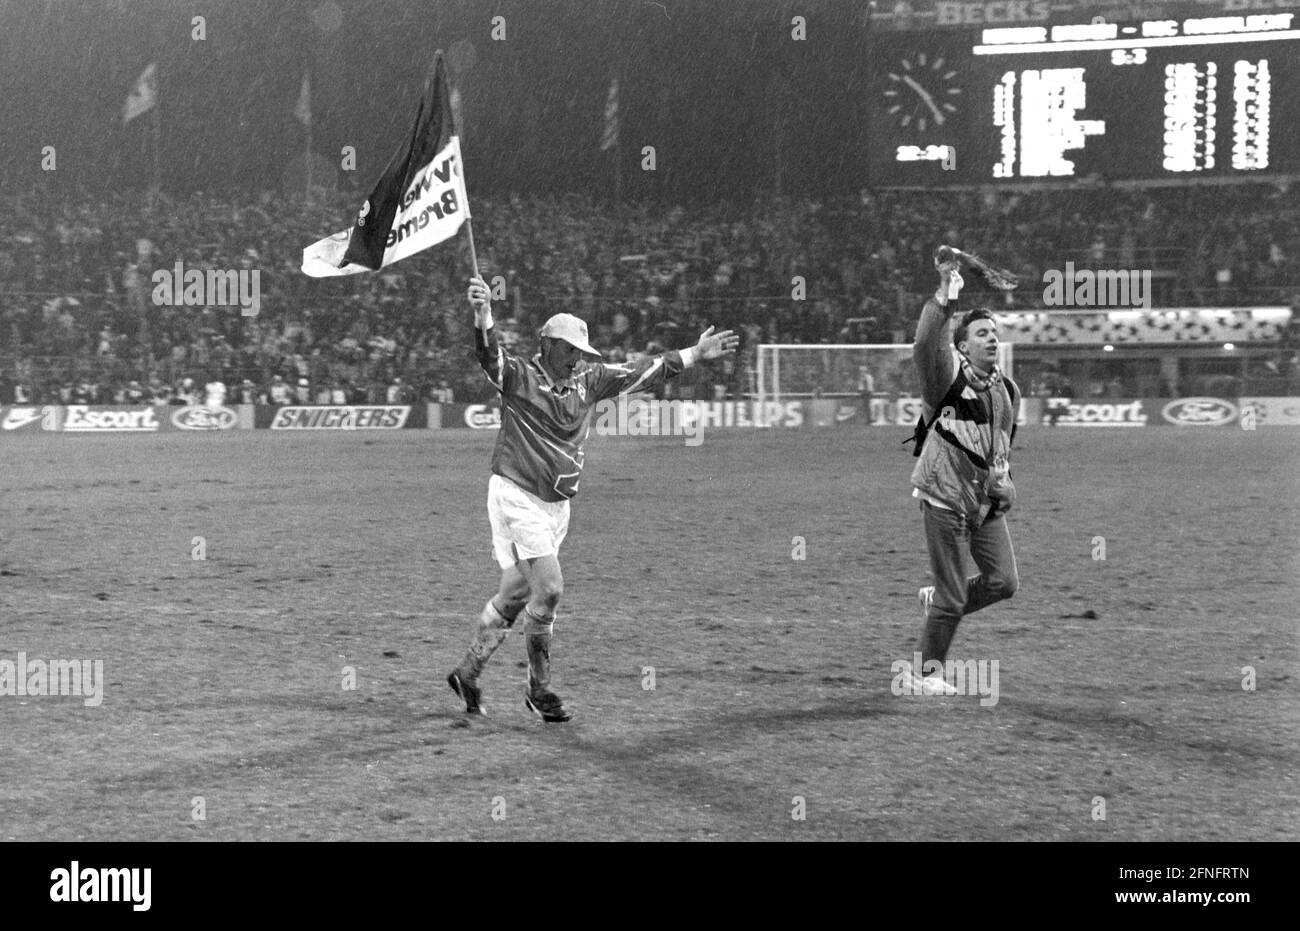 FOOTBALL 1. BUNDESLIGA SEASON 1993/1994 Quarterfinal SV Werder Bremen - RSC Anderlecht 08.12.1993 Ulrich Borowka (left, SV Werder Bremen) cheers with flag and fan after the final whistle. The scoreboard shows the historic result of 5:3. PHOTO: WEREK Press Photo Agency xxNOxMODELxRELEASExx [automated translation] Stock Photo